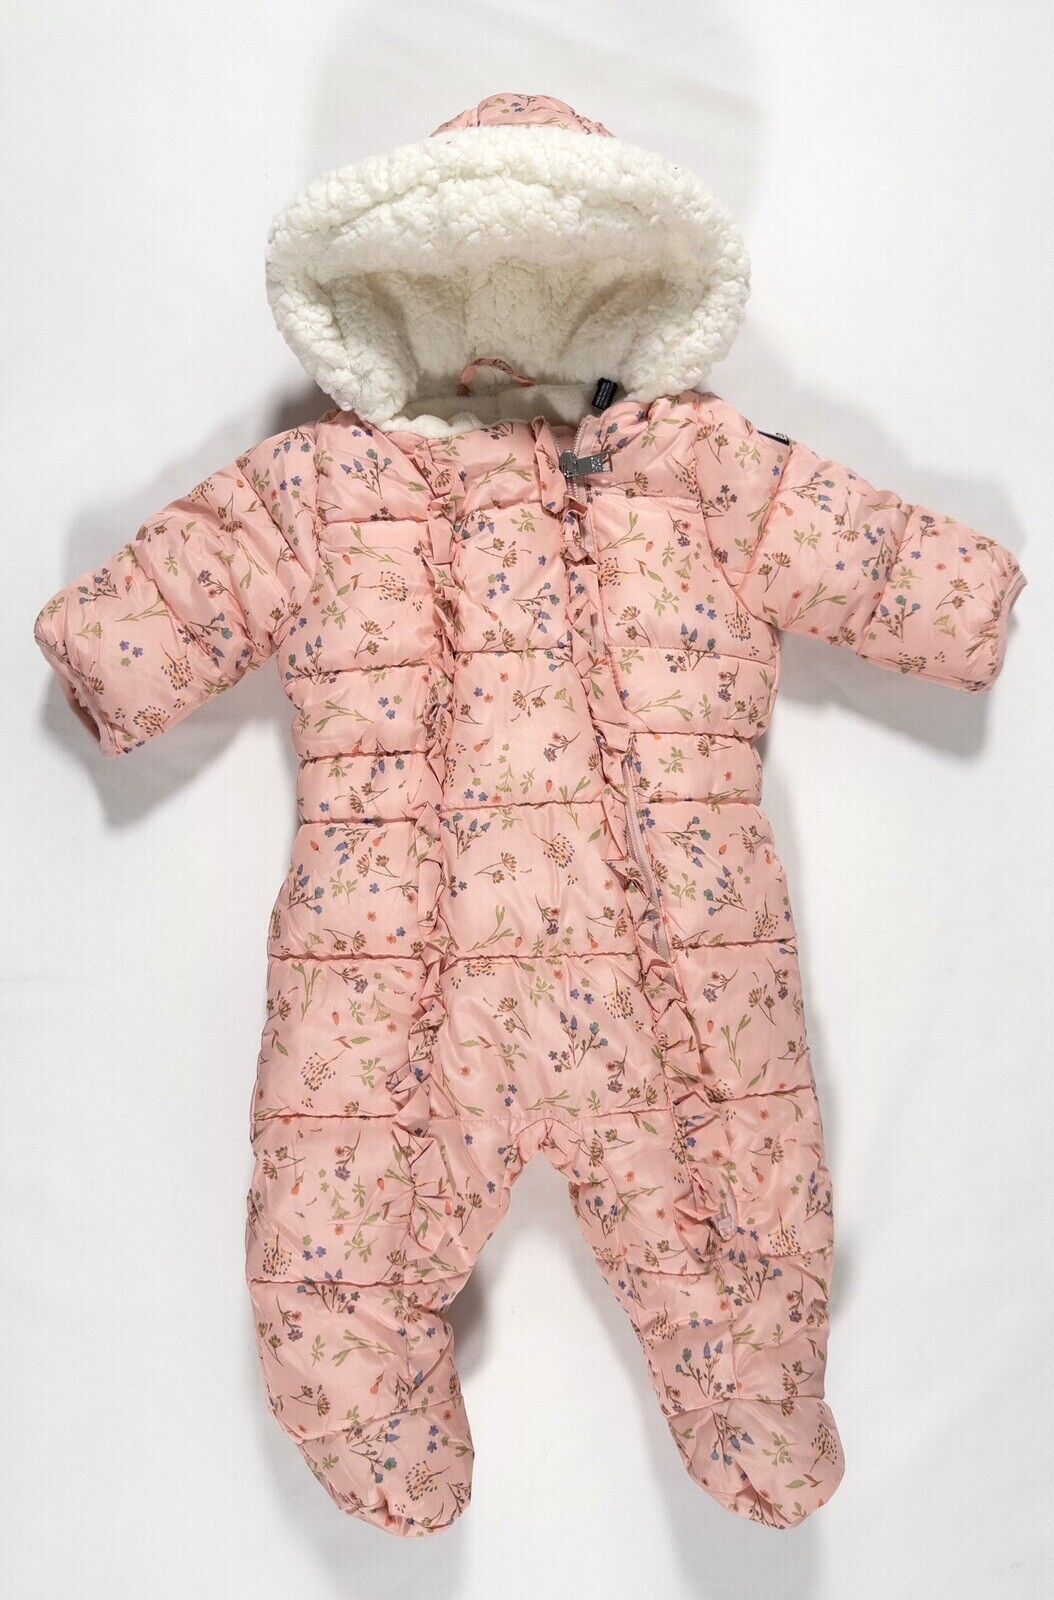 DKNY JEANS Baby Girl Pink Floral Snowsuit All in one Size UK 3-6 Months